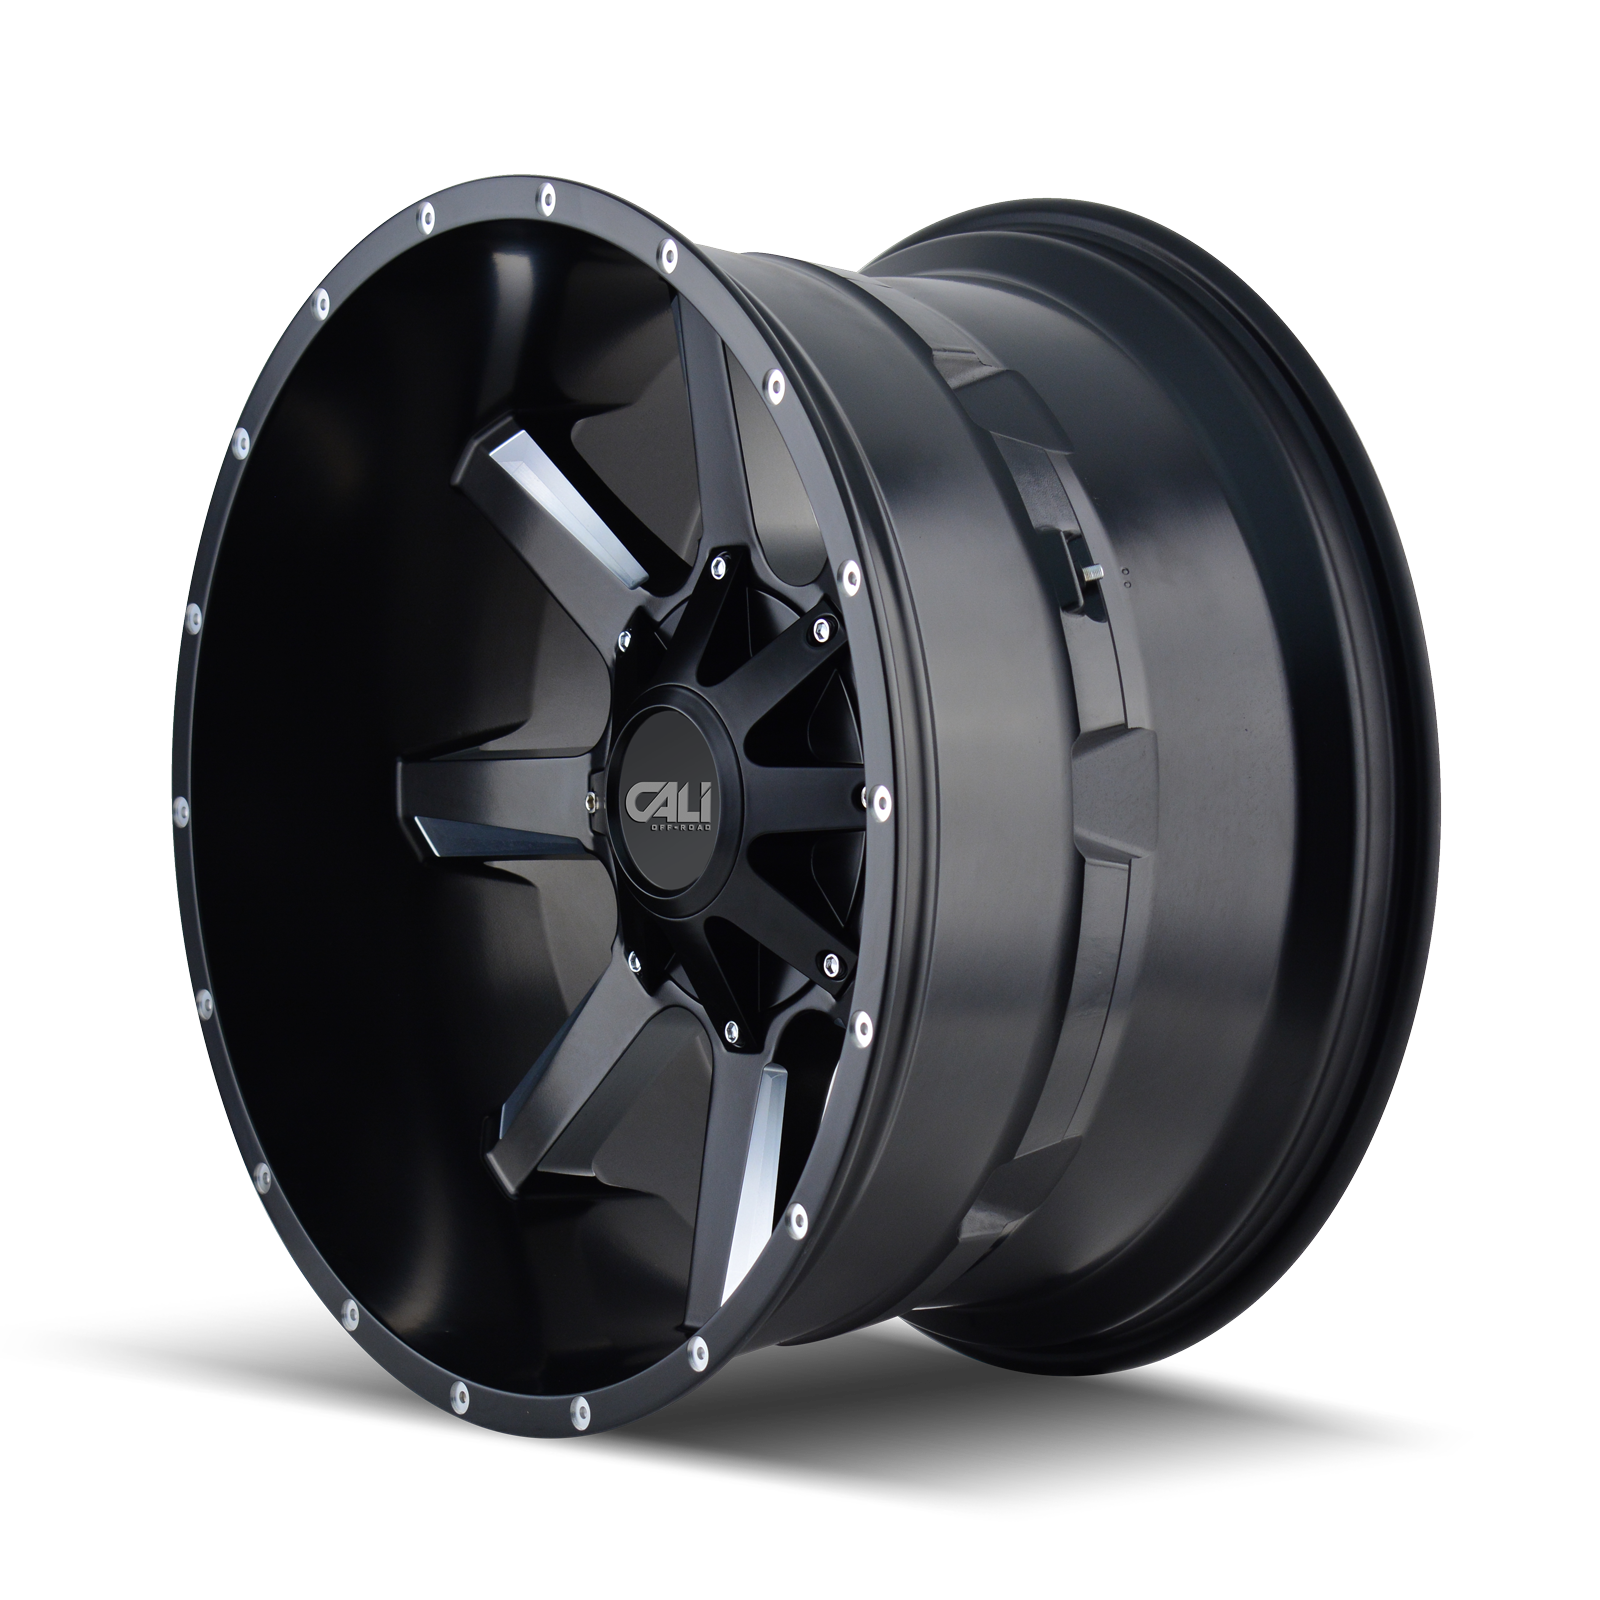 Cali Off-road BUSTED Satin black milled 22x12 -44 8x180mm 124.1mm - WheelWiz